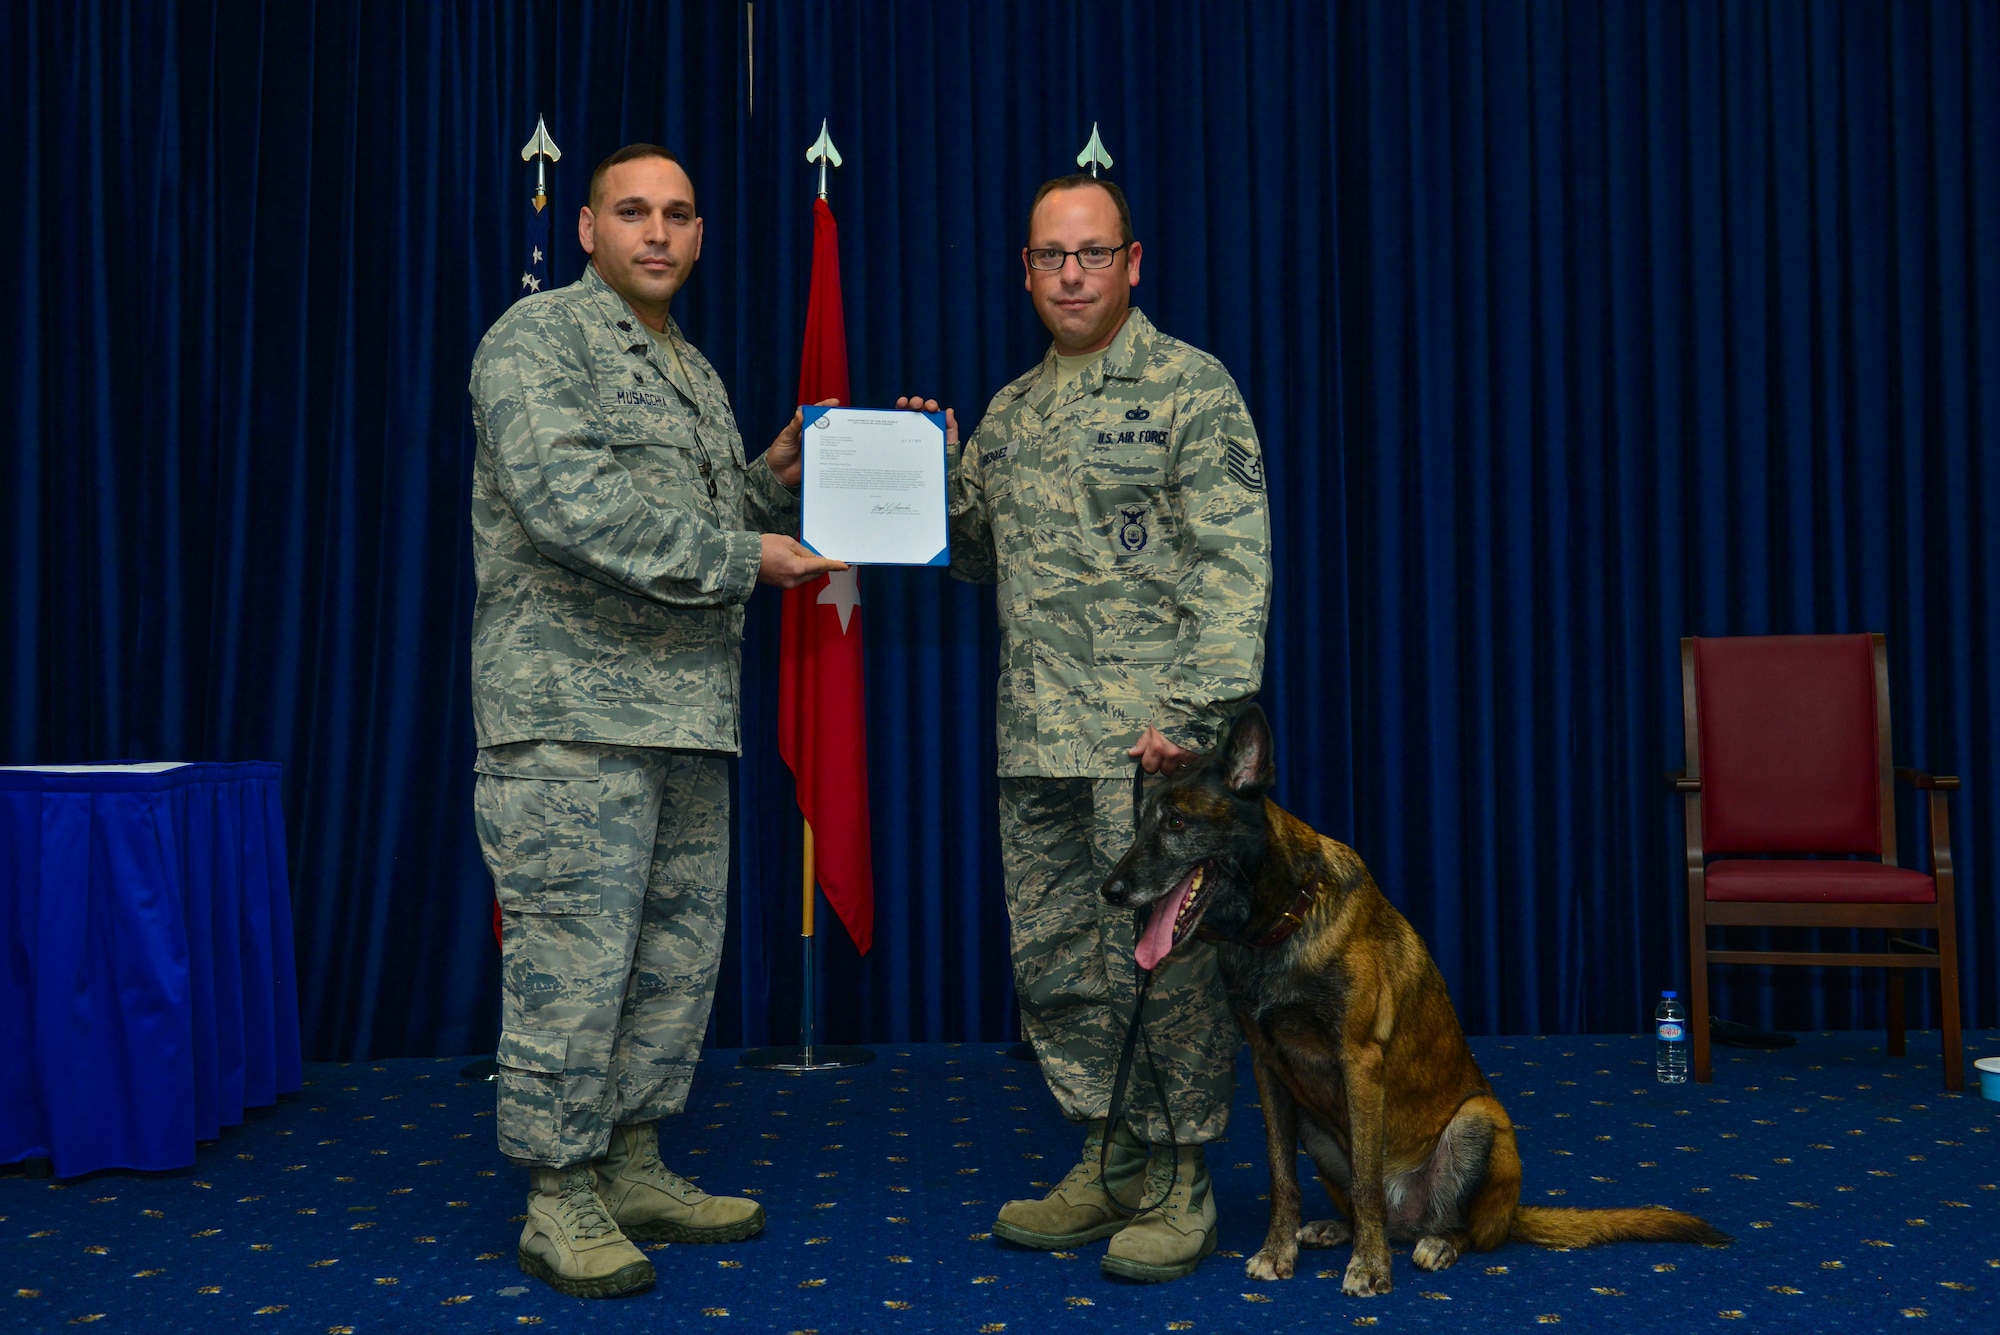 Lt. Col. Joseph Musacchia, 39th Security Forces Squadron commander, hands a certificate of retirement to Tech. Sgt. Kenneth Fresquez, 39th SFS kennel master, for Kira, 39th SFS military working dog Oct. 27, 2014, Incirlik Air Base, Turkey.  Staff Sgt. Alexandra Woodlee, 39th SFS MWD handler, will be making the transition to civilian life with Kira after her adoption. (U.S. Air Force photo by Senior Airman Nicole Sikorski/Released)